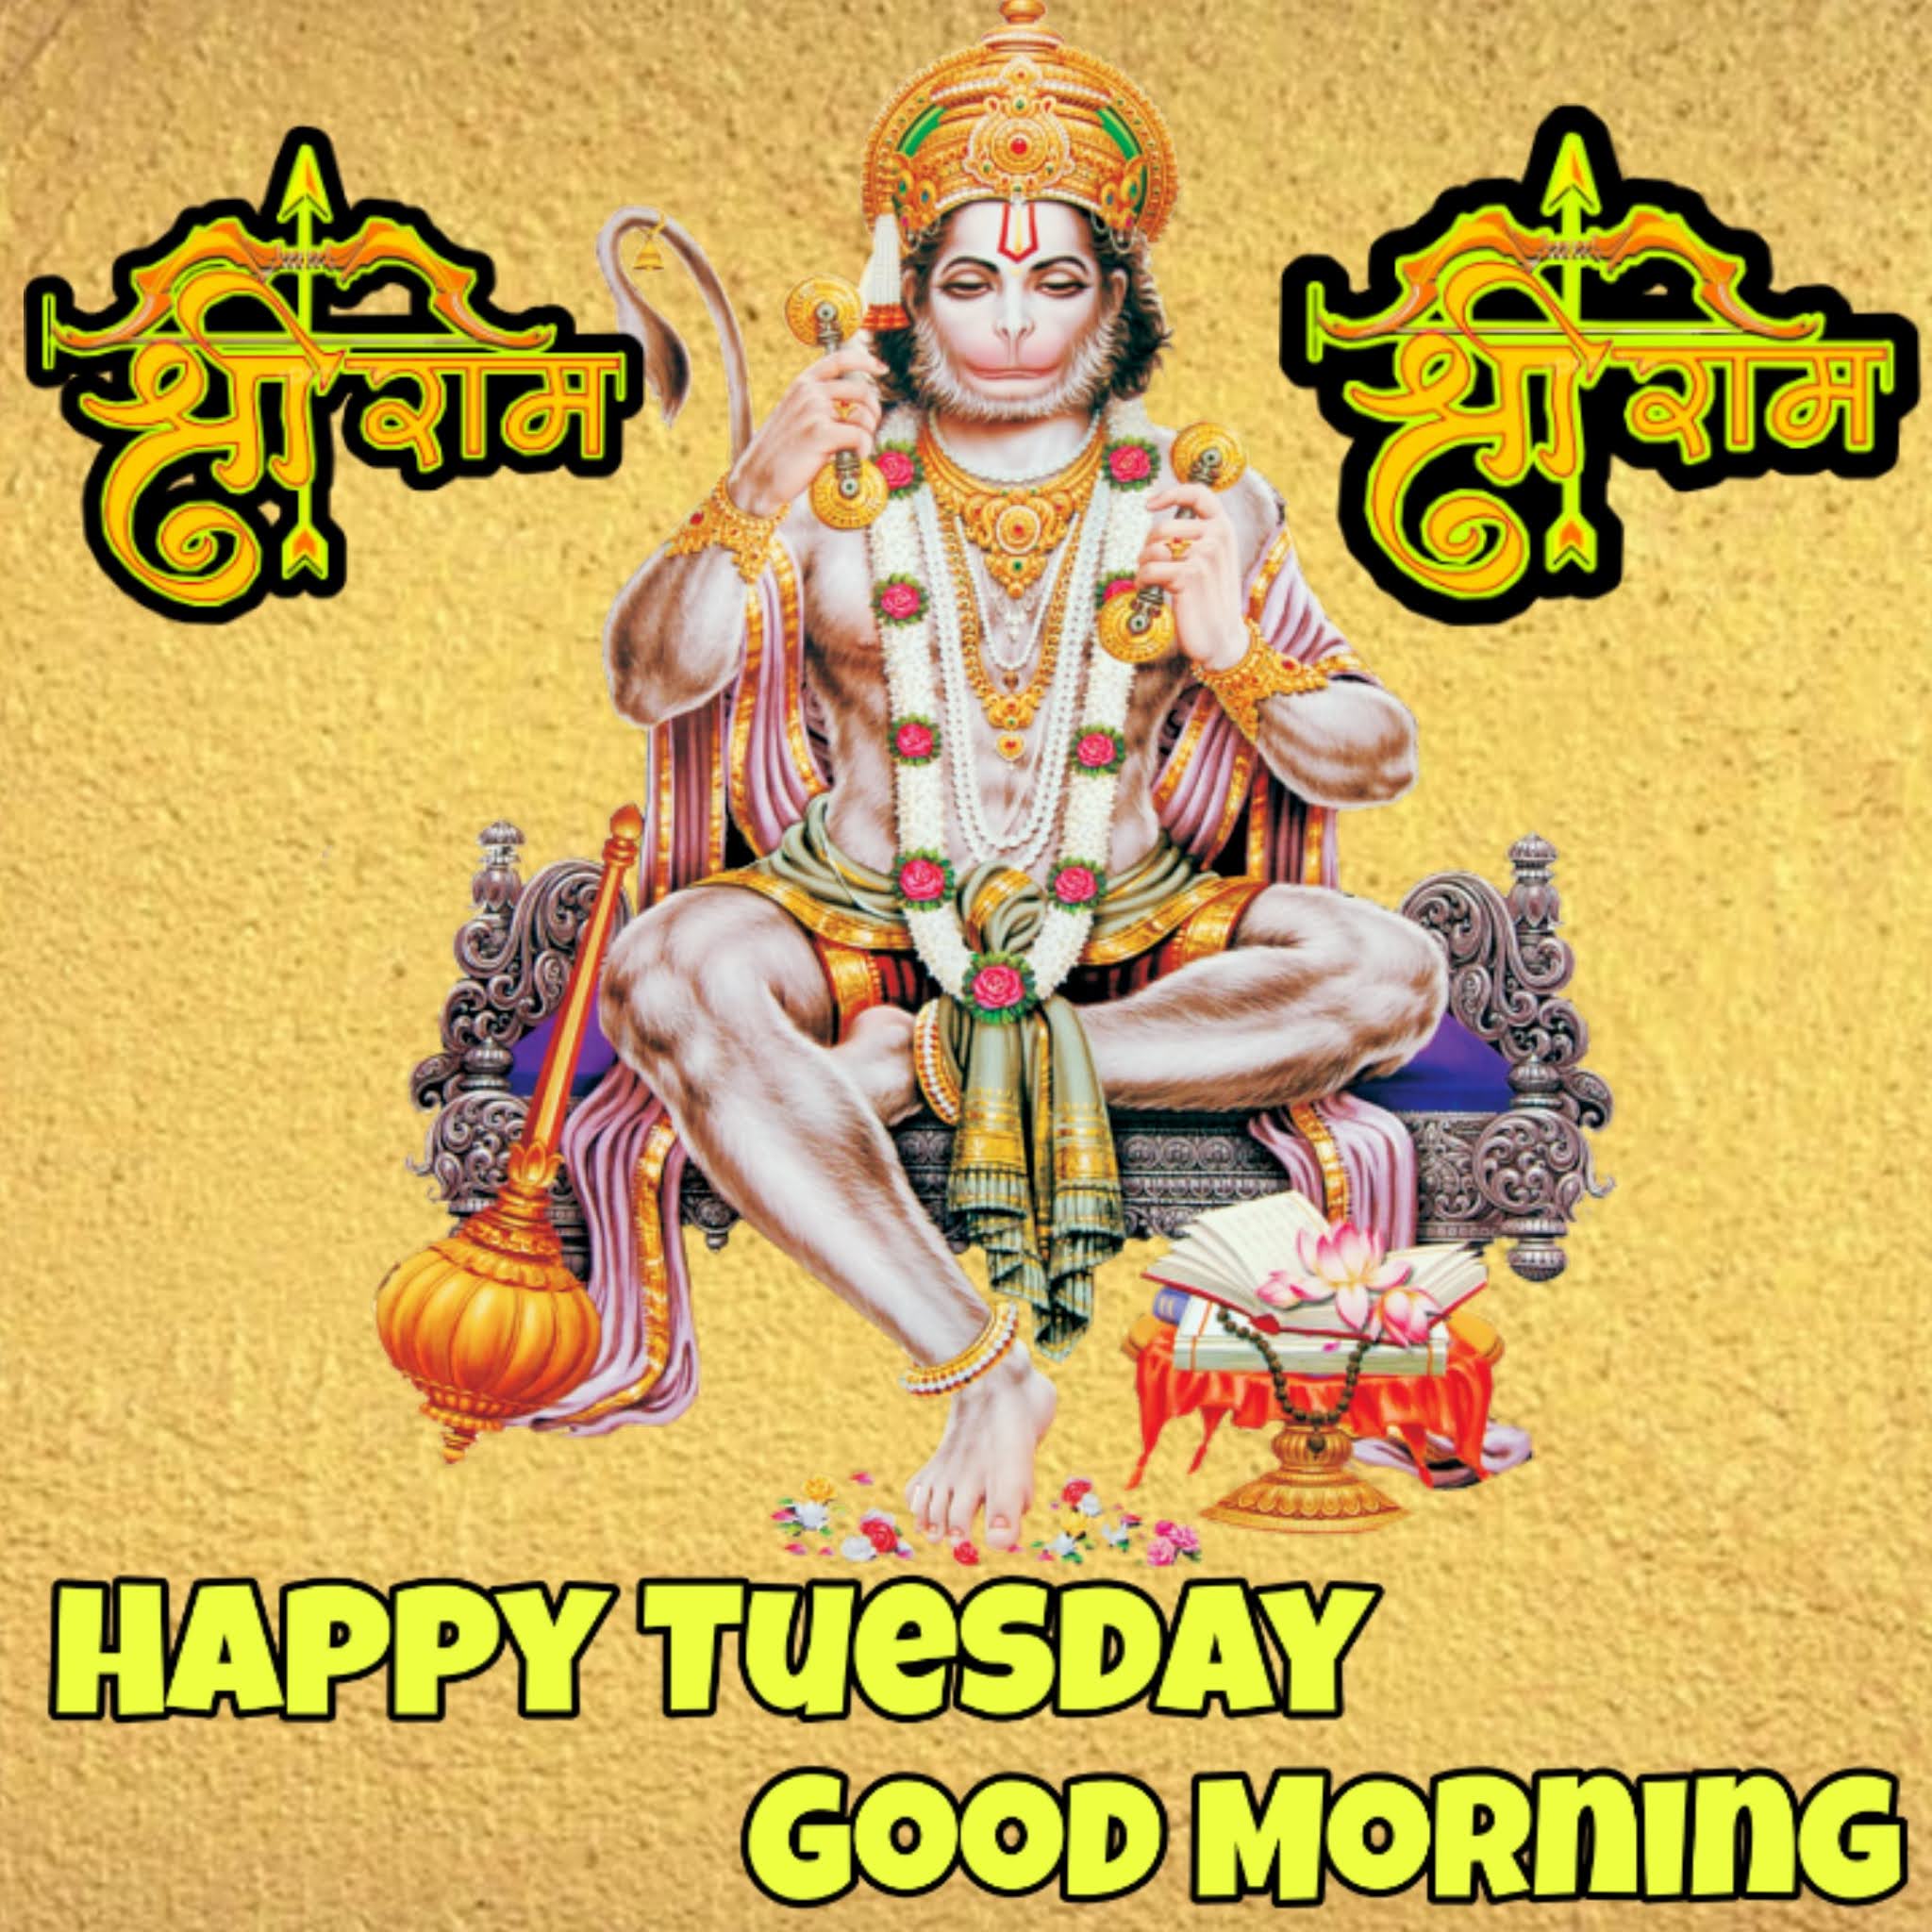 65 Happy Tuesday Good Morning Lord Hanuman Images Free Download Best Wishes Image